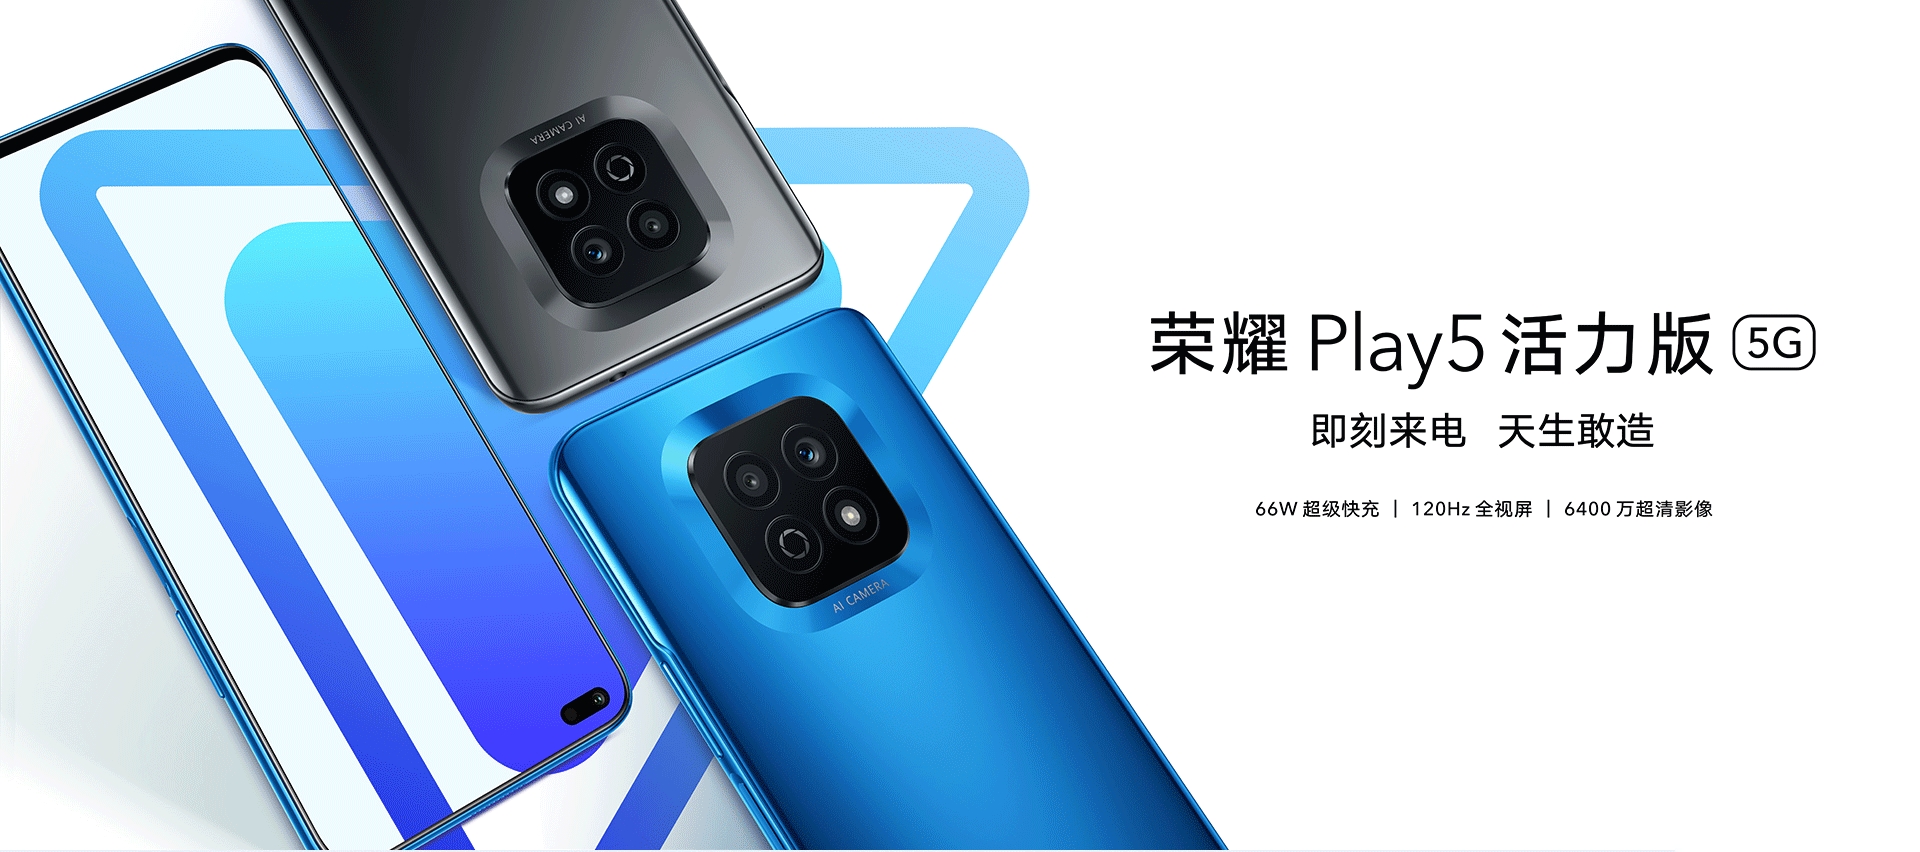 Honor Play 5 Vitality Edition: 120Hz screen, MediaTek Dimensity 900 chip and 66W charging for $280